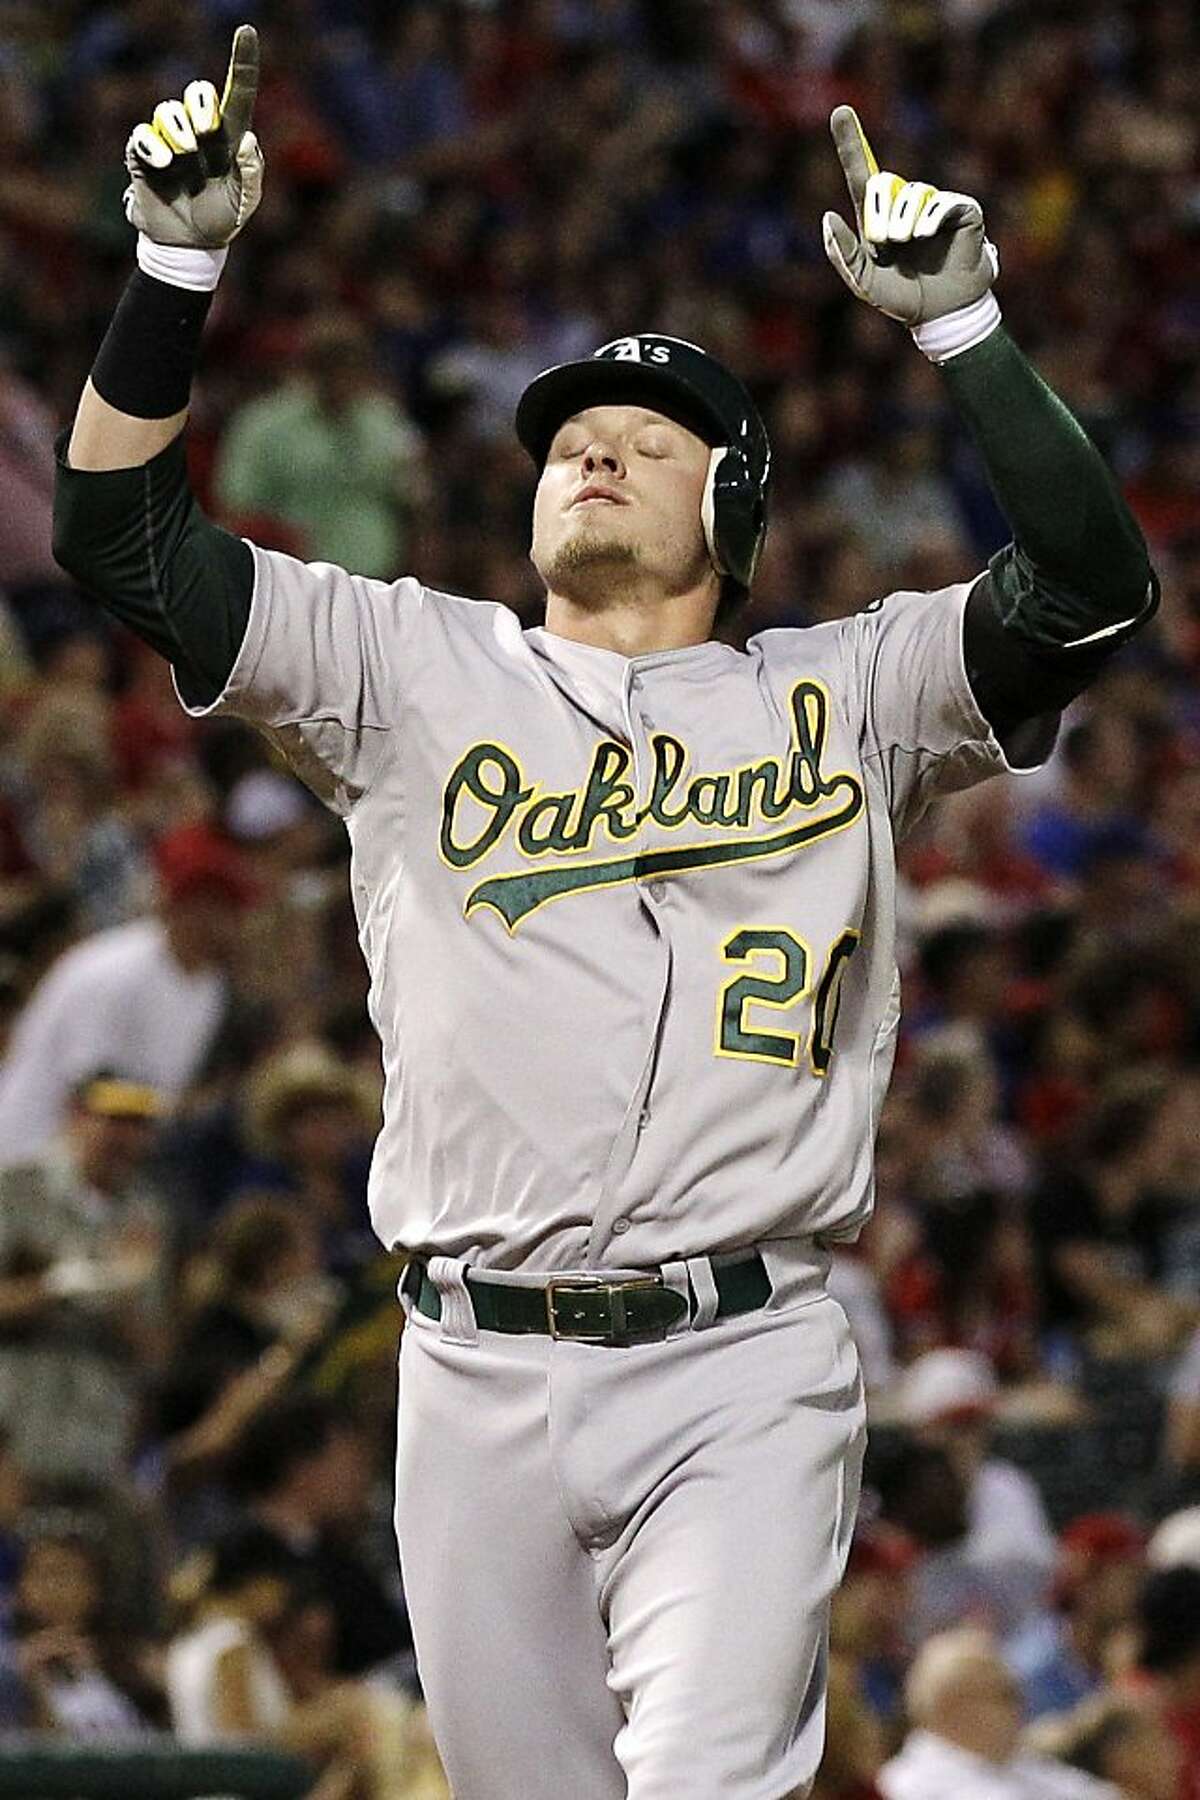 Oakland Athletics' Josh Donaldson points skyward as he approaches the plate following his two-run home run in the second inning of a baseball game against the Texas Rangers, Monday, Sept. 24, 2012, in Arlington, Texas. Brandon Moss also scored on the hit. (AP Photo/Tony Gutierrez)